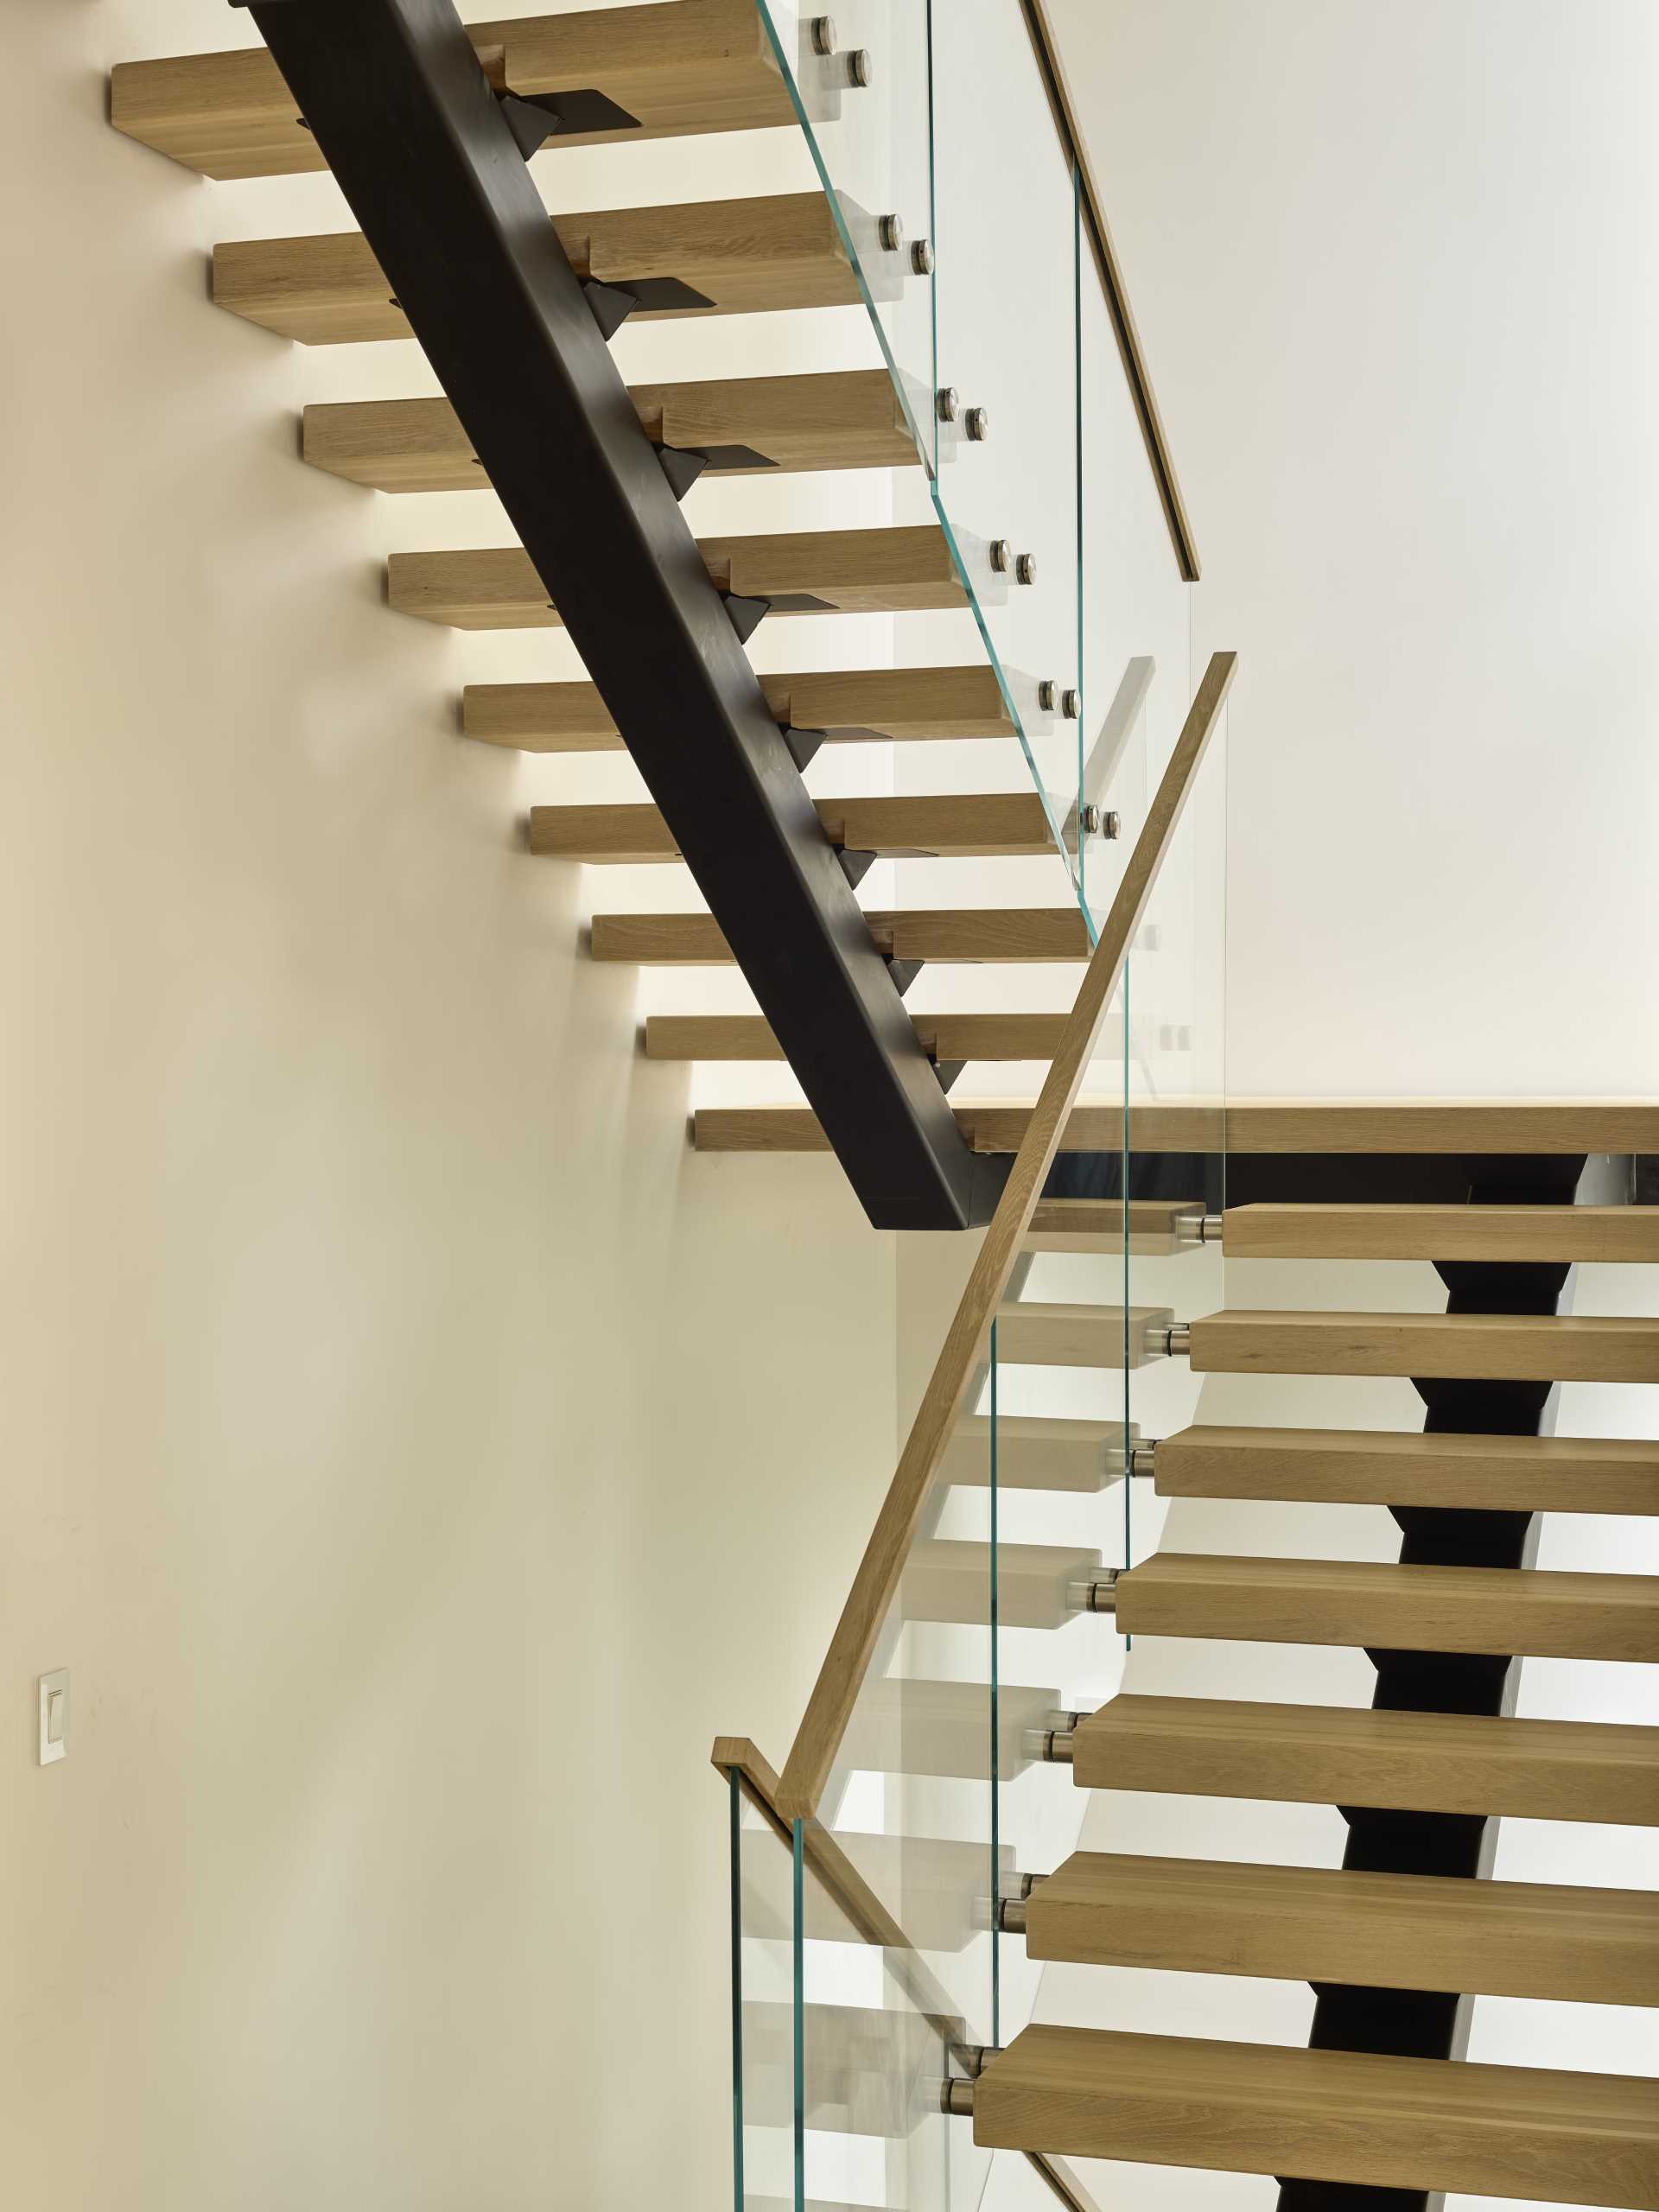 Wood and steel stairs with glass railings connect the various floors of this modern home.